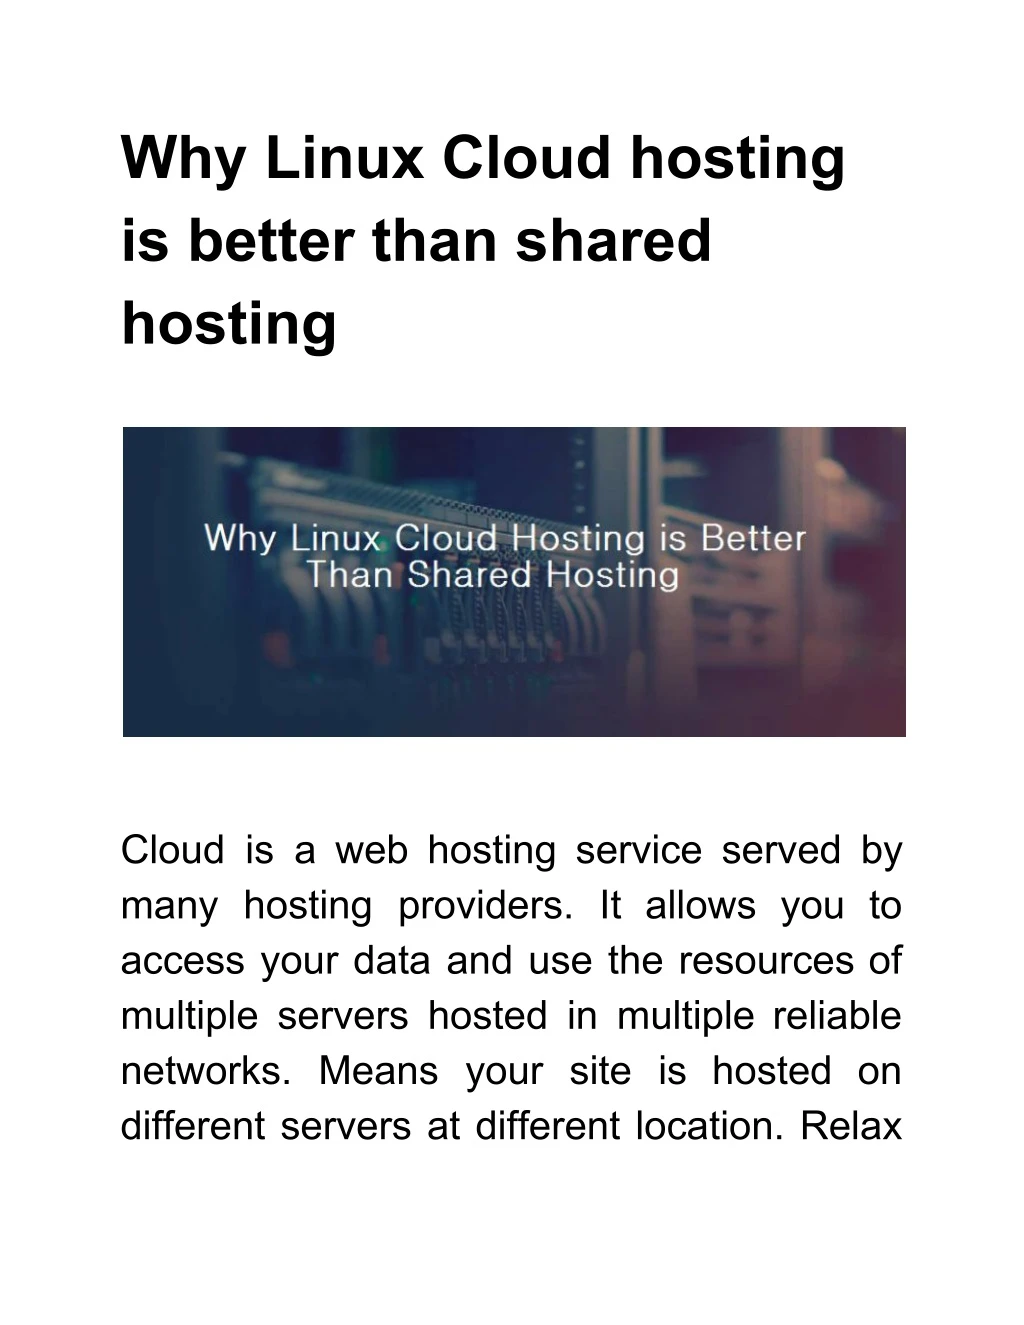 why linux cloud hosting is better than shared